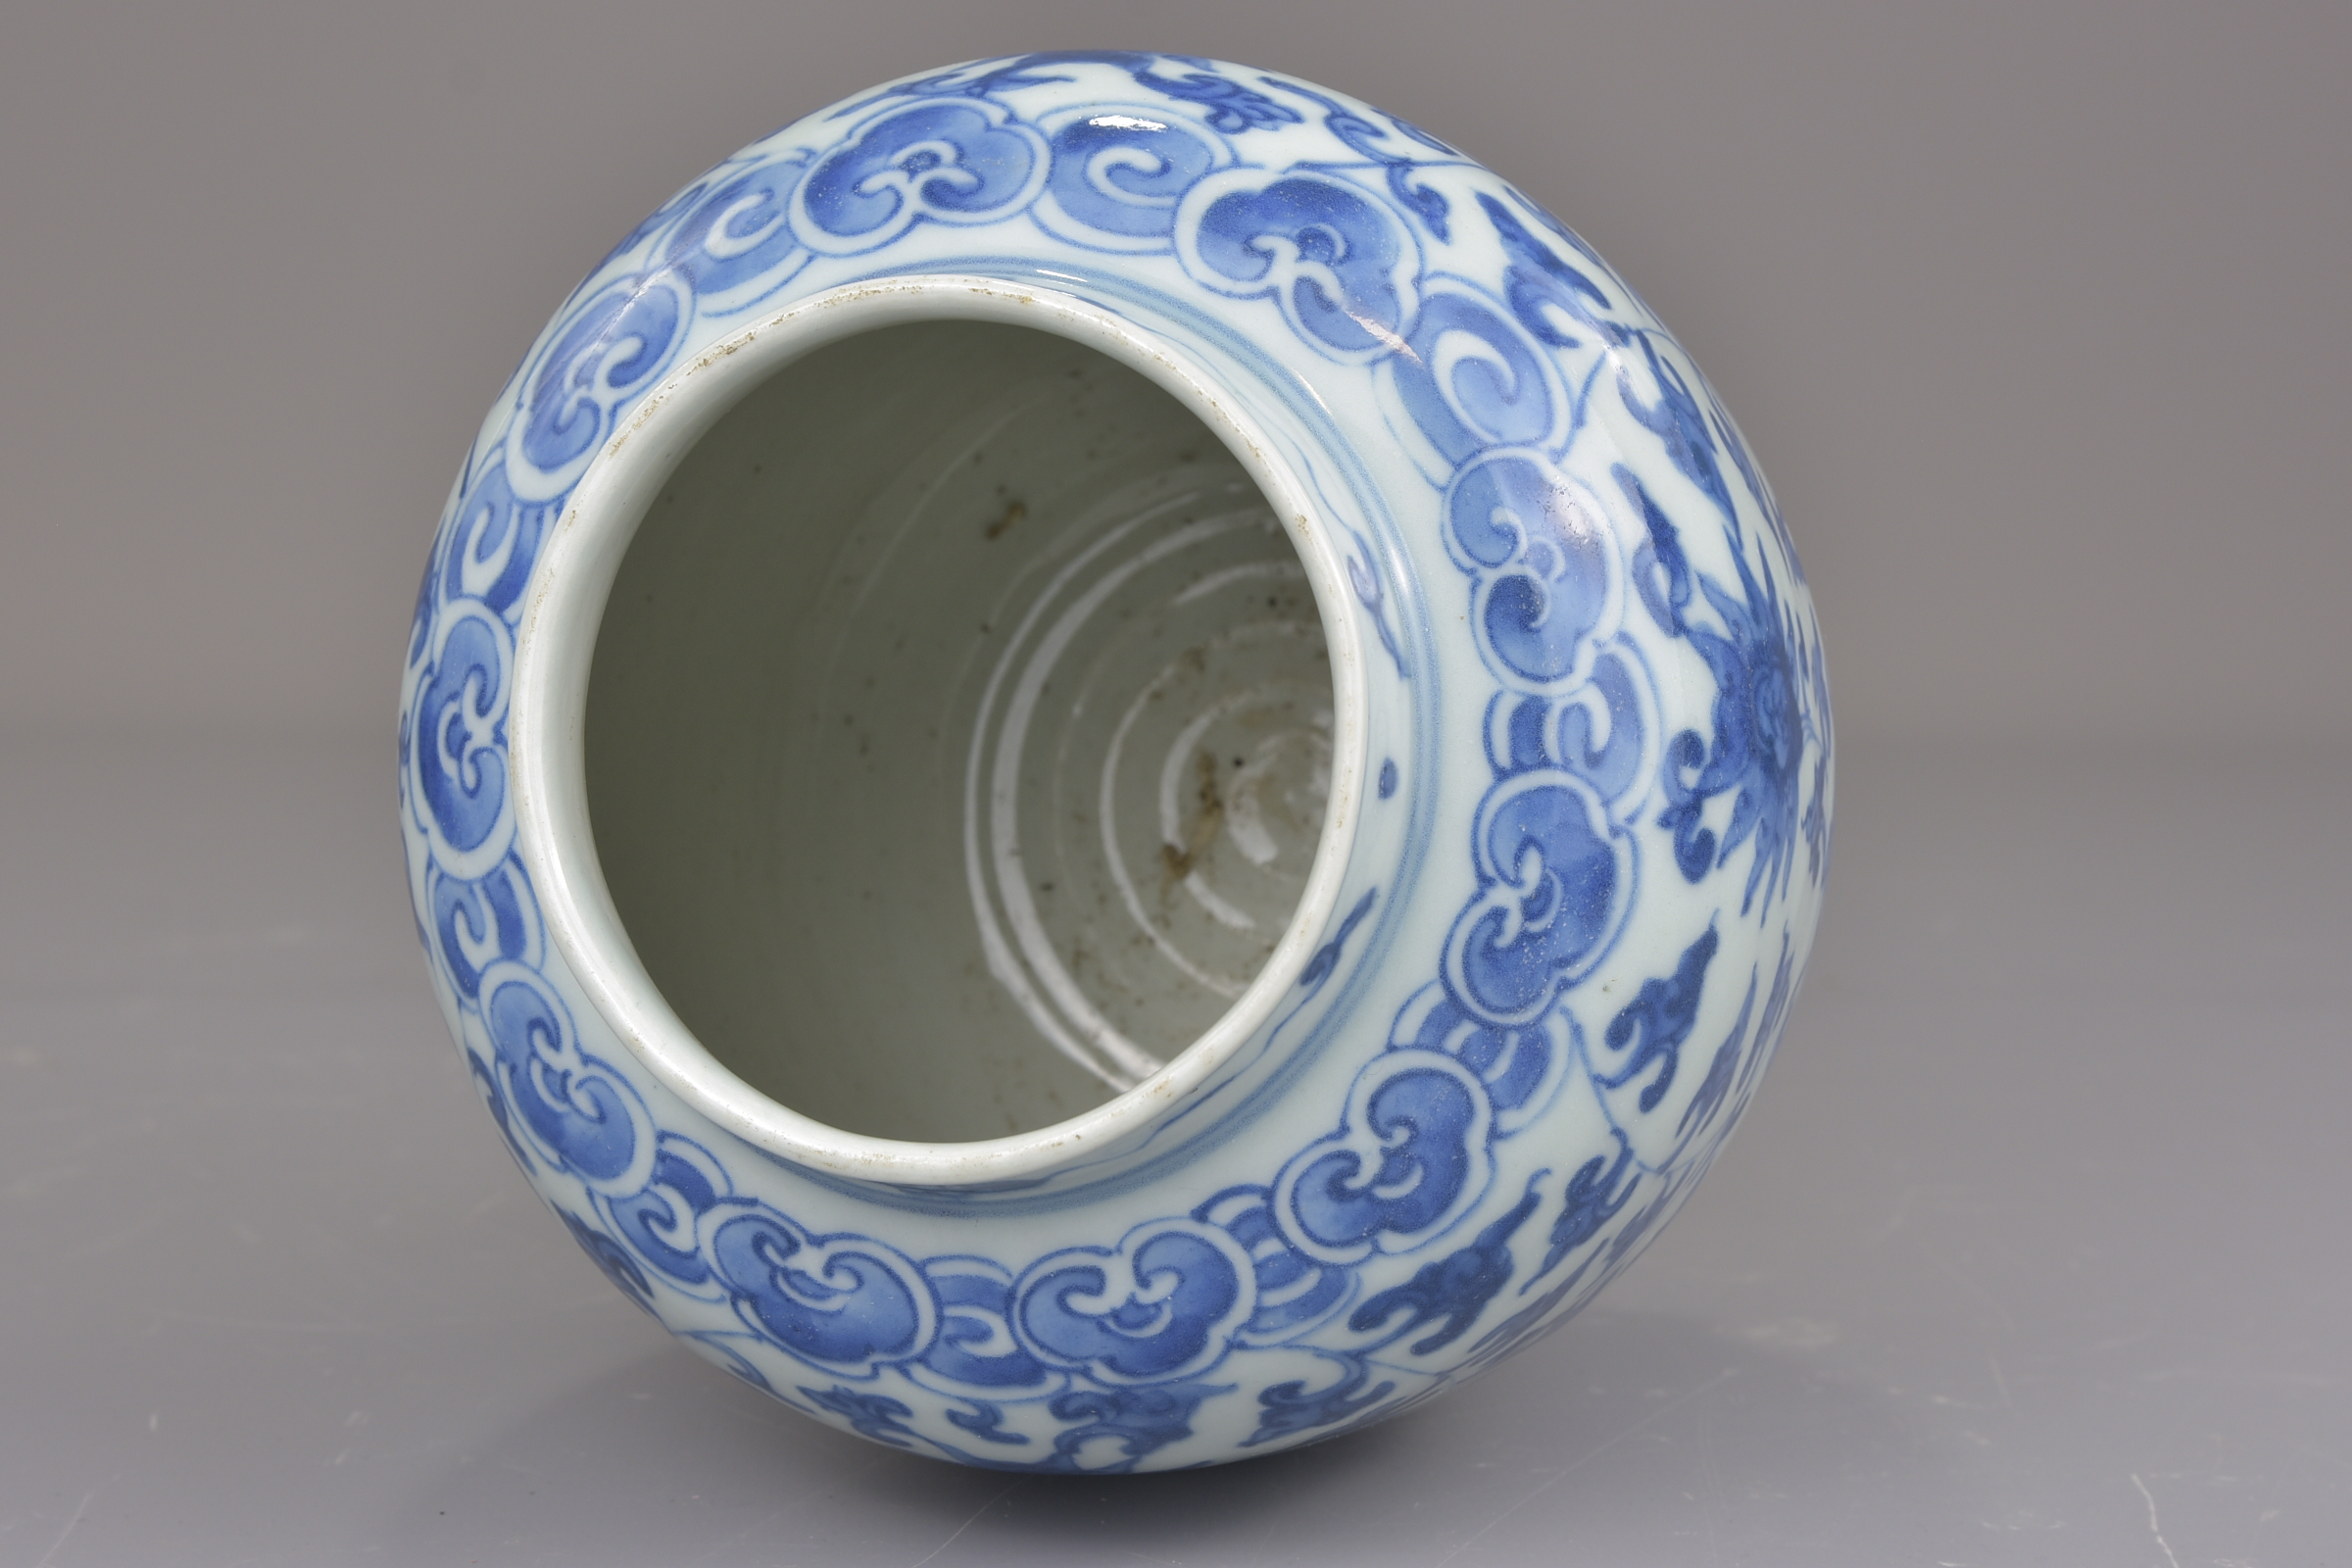 A Chinese blue and white porcelain jar possibly Ming painted with a floral design. 16cm tall - Image 7 of 7